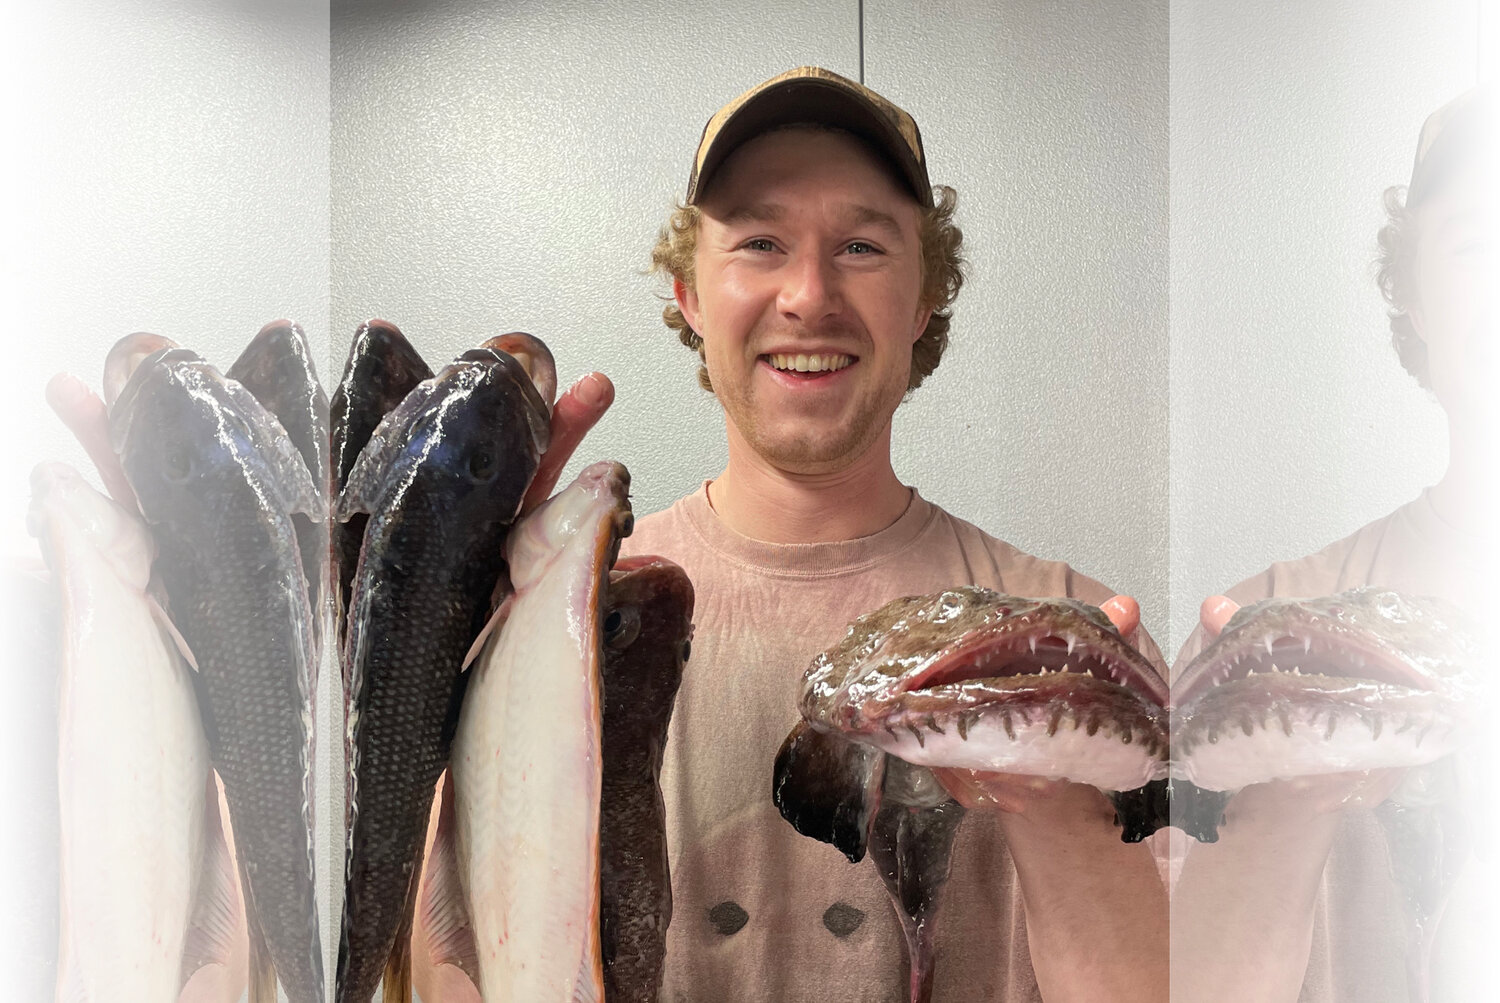 Mike Lapierre holds up a fresh catch including a jumbo scup, monkfish, and more, ready for cooking